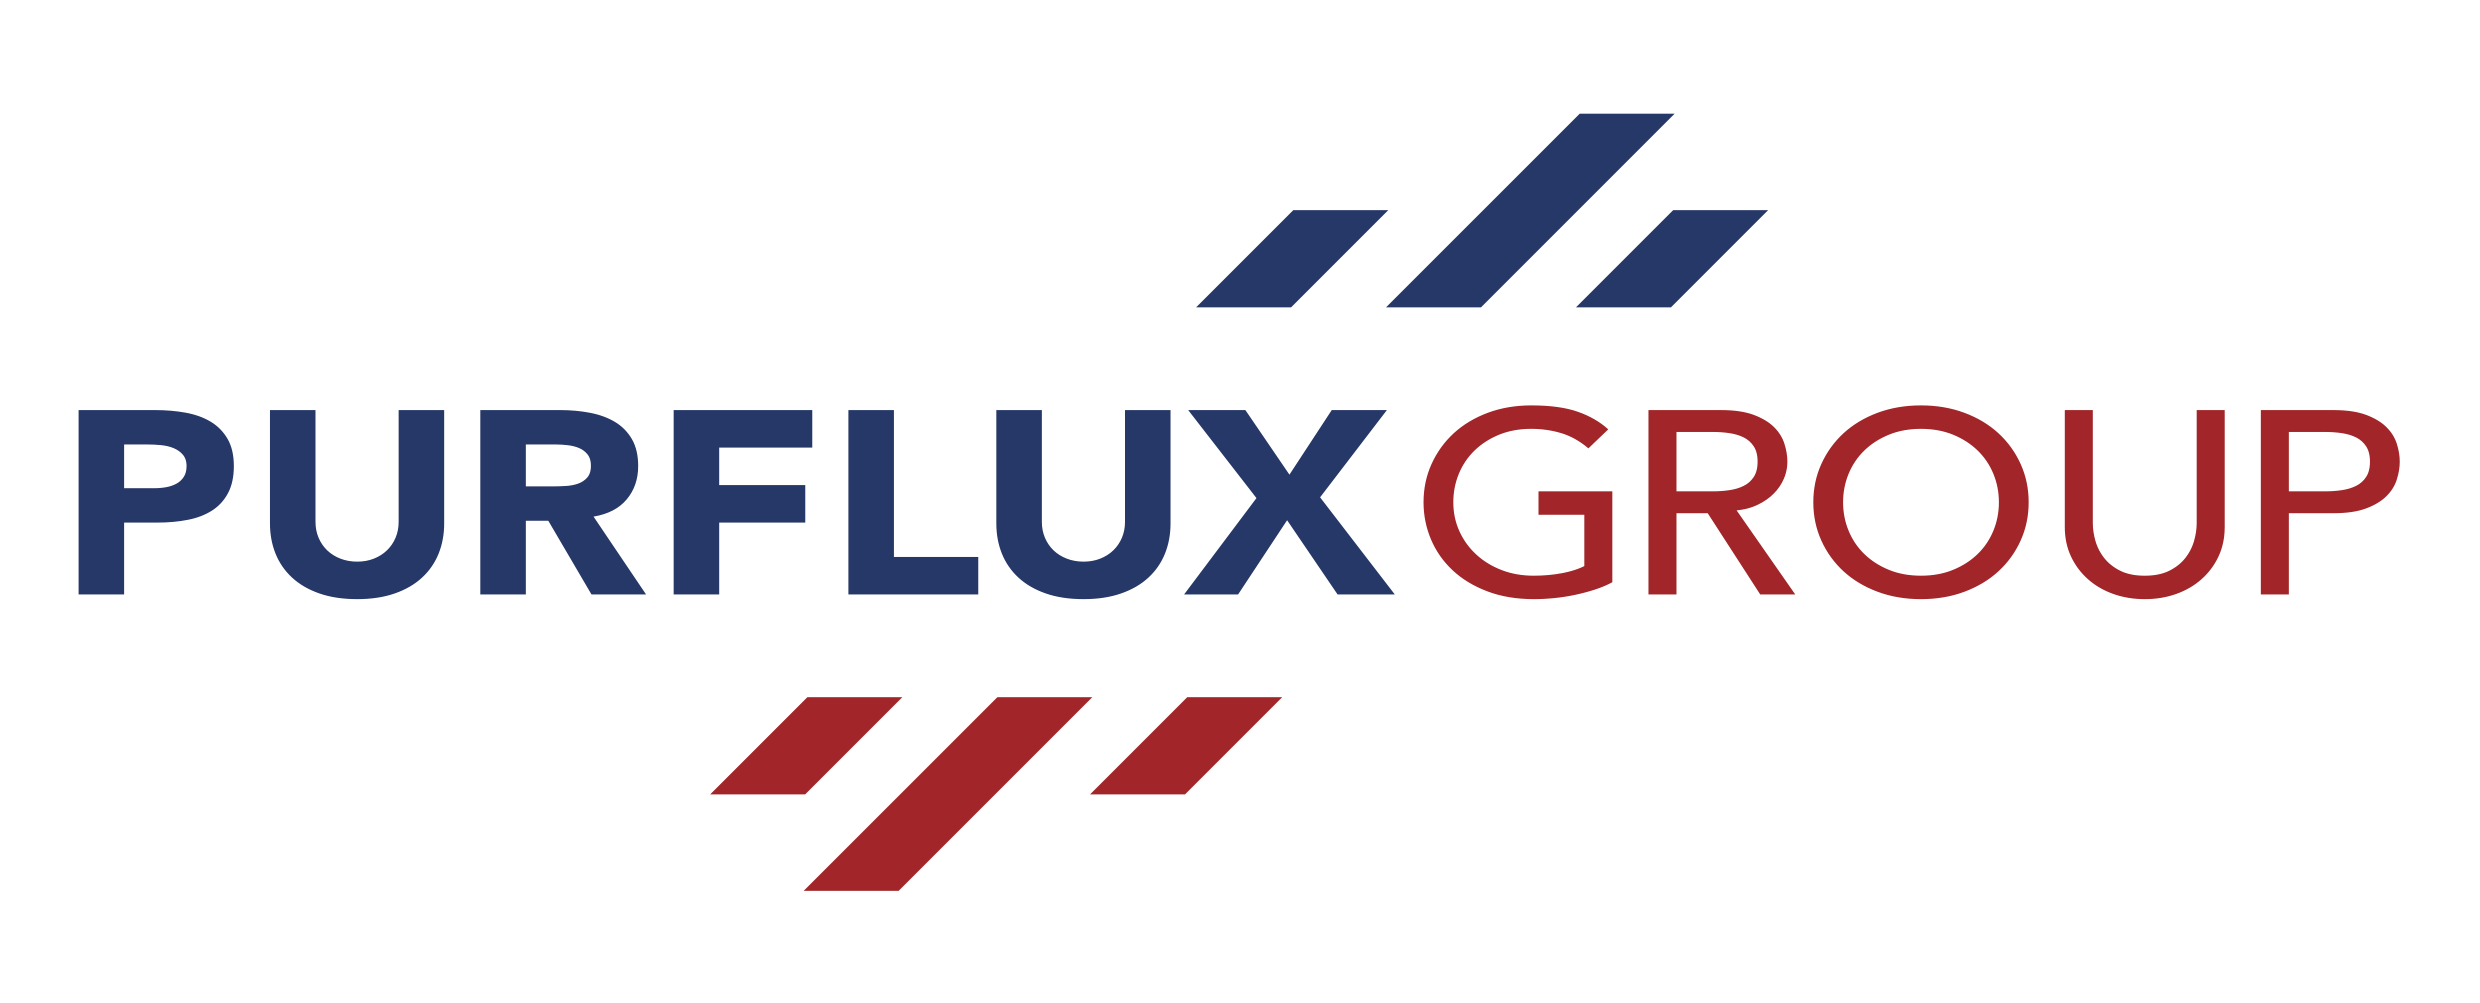 PURFLUX GROUP